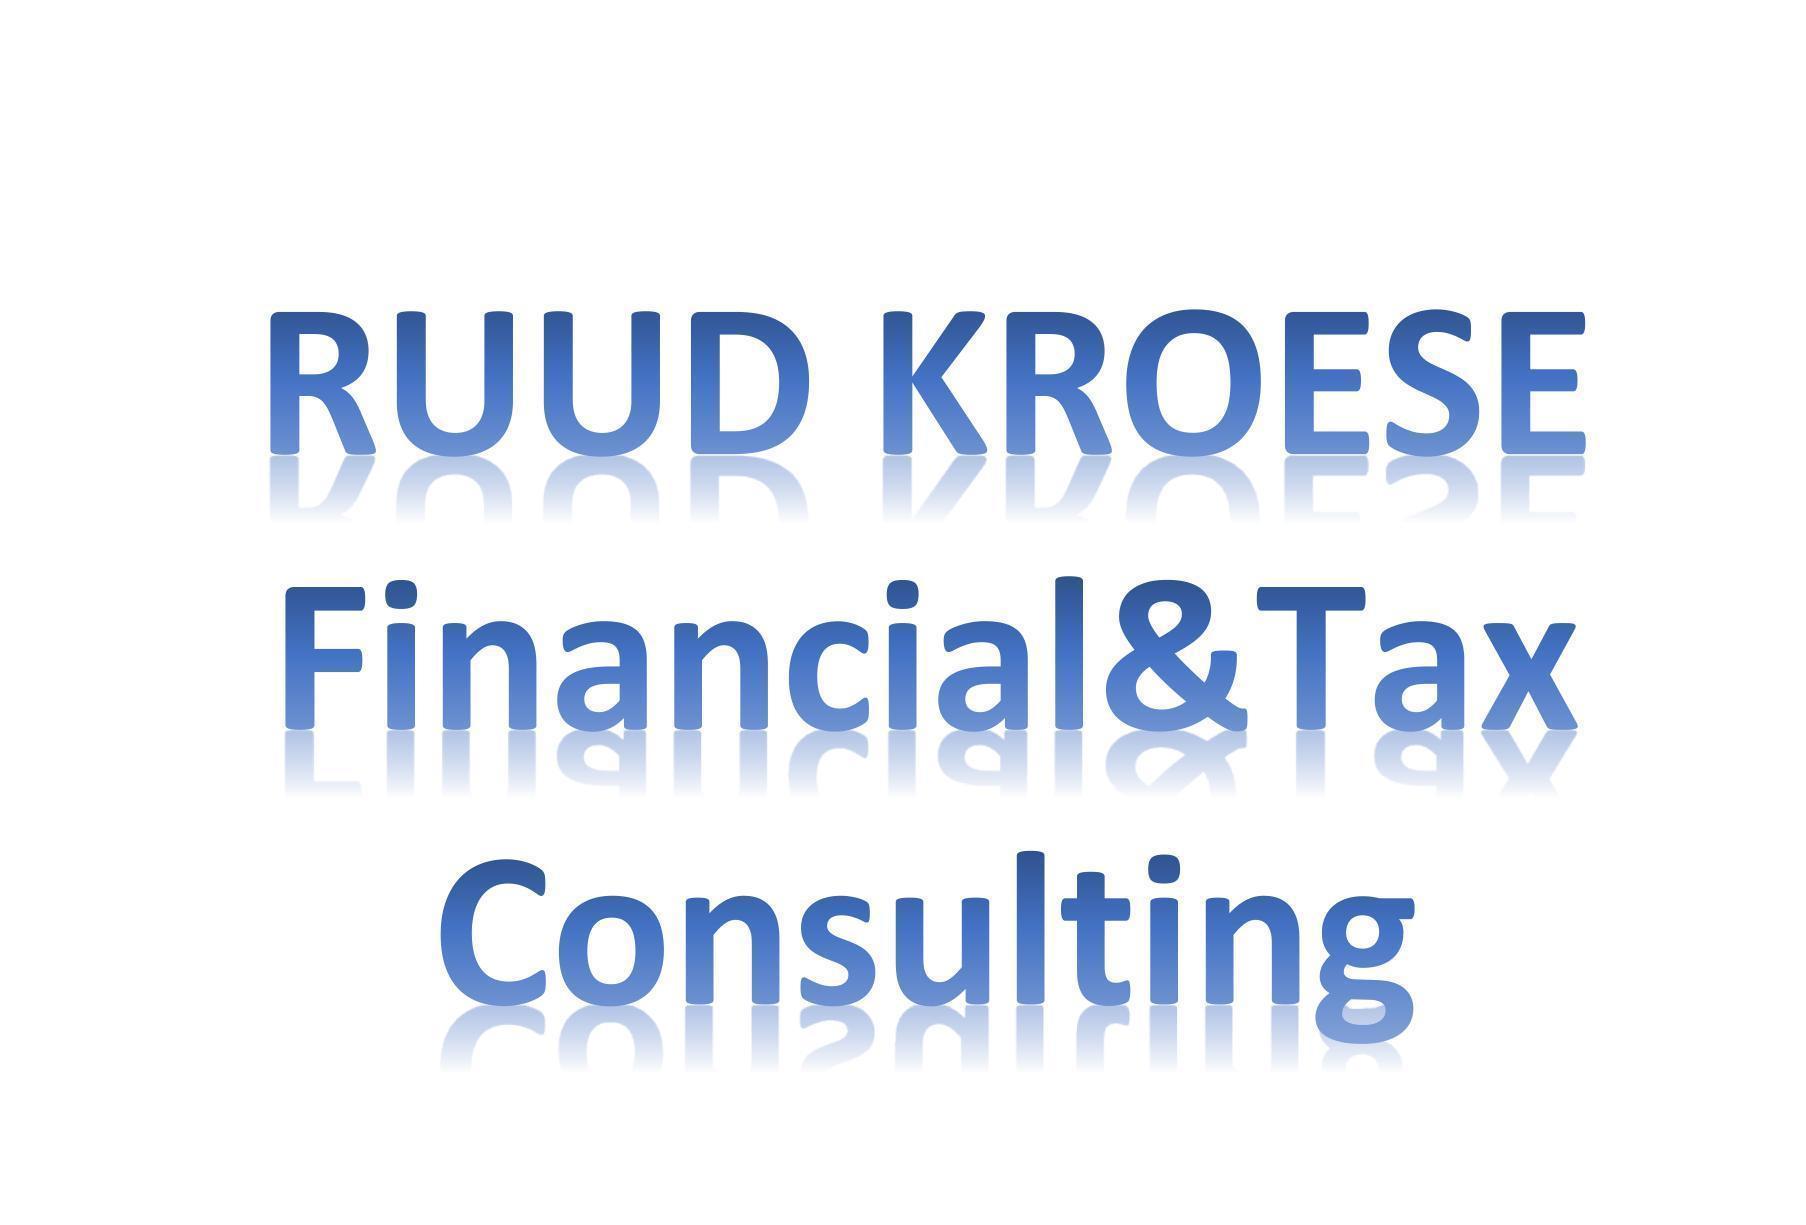 Financial & Tax Consulting R.P. Kroese